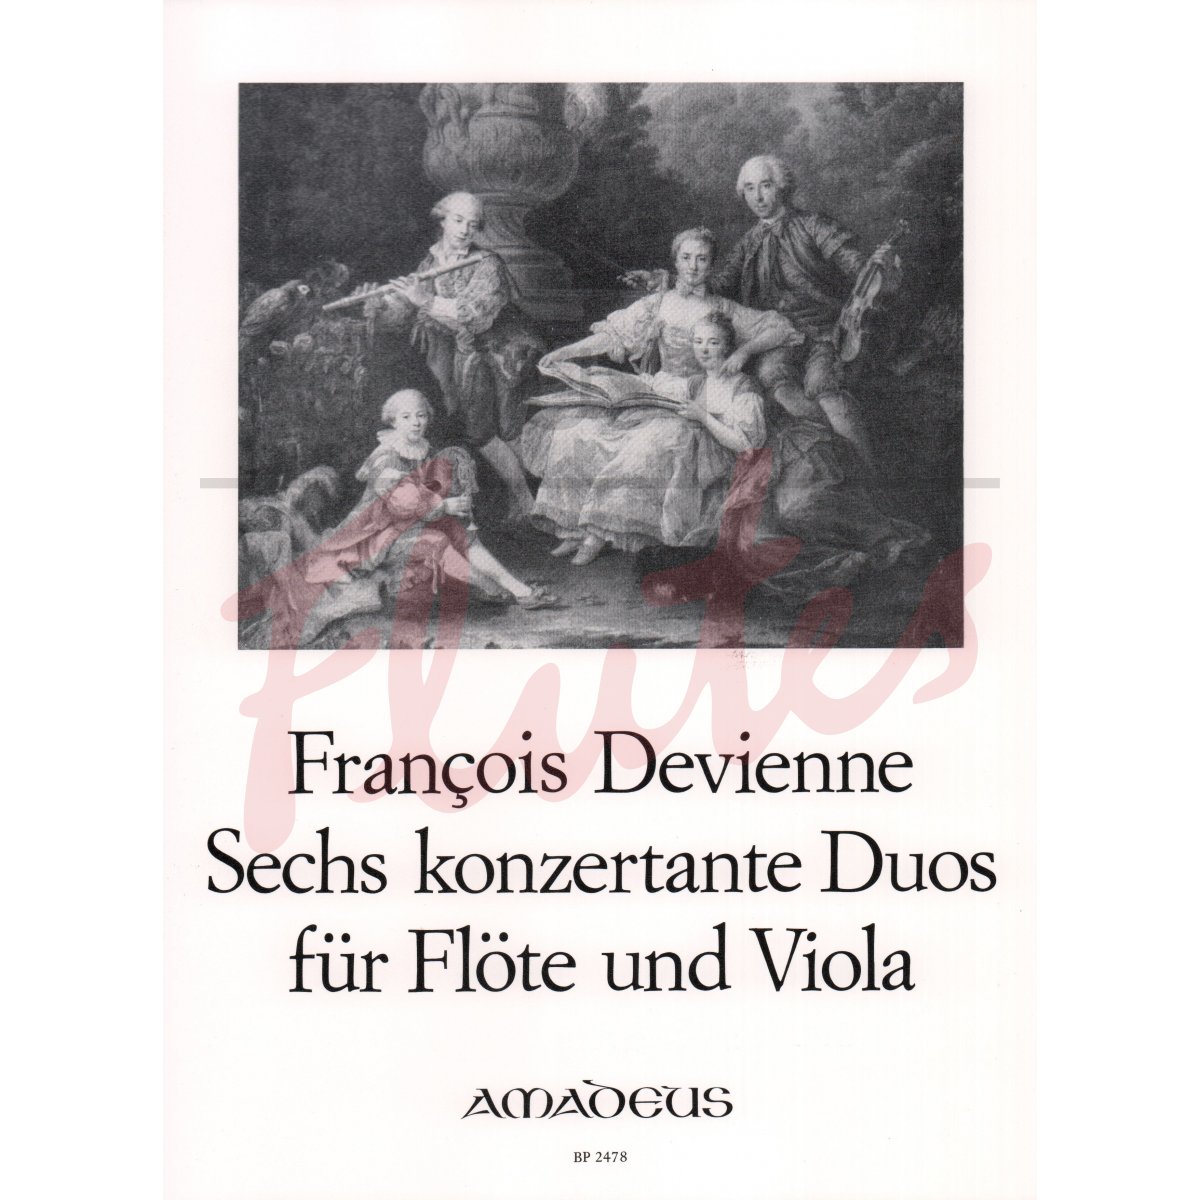 Six Concertante Duos for Flute and Viola